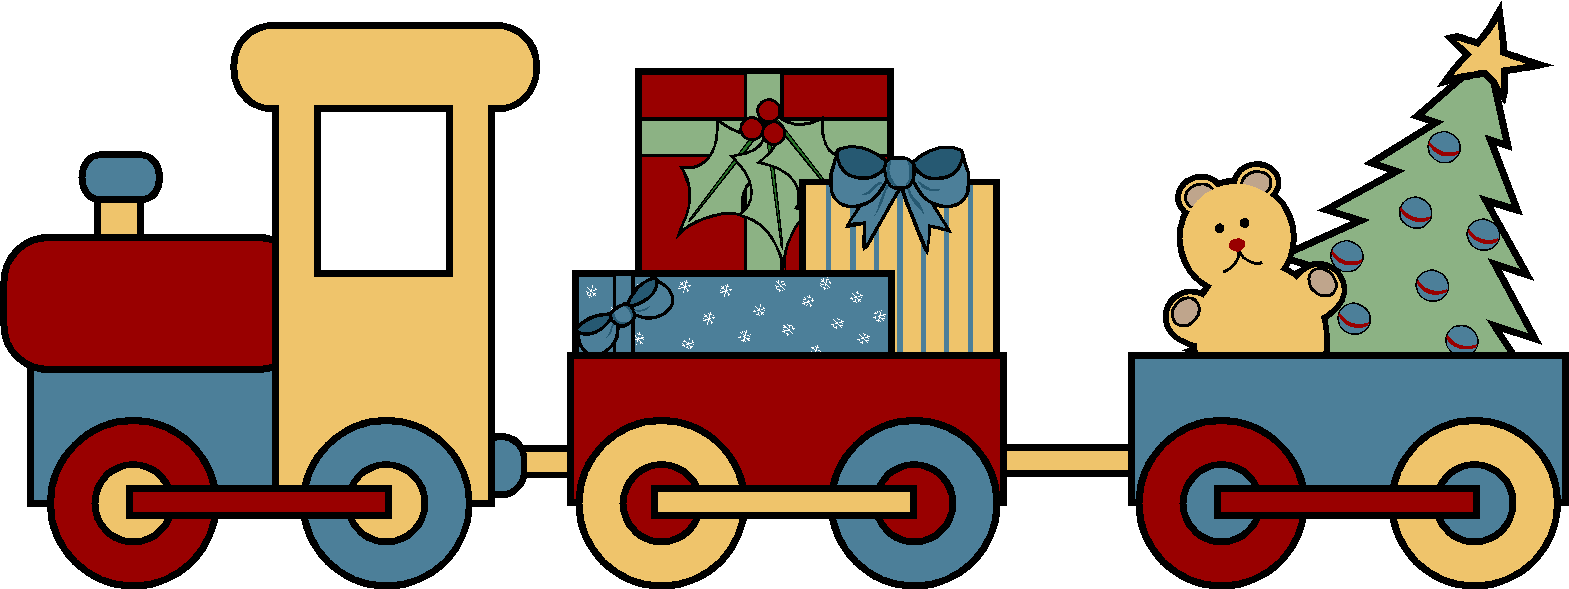 Free Christmas Toy Cliparts, Download Free Clip Art, Free.